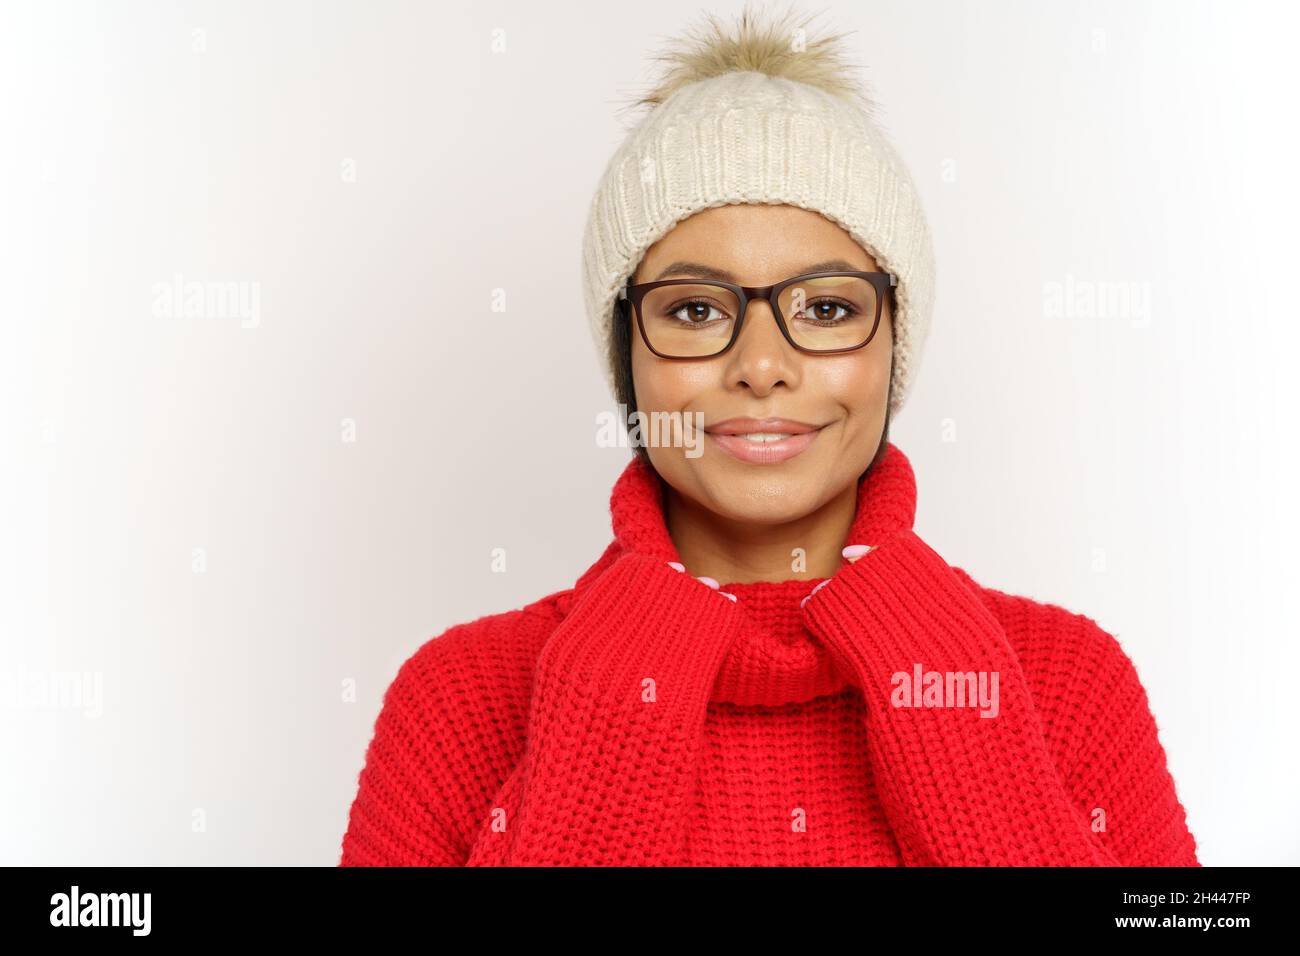 Happy black female in winter clothes, hat and cozy knitted sweater ready for cold season outdoors Stock Photo